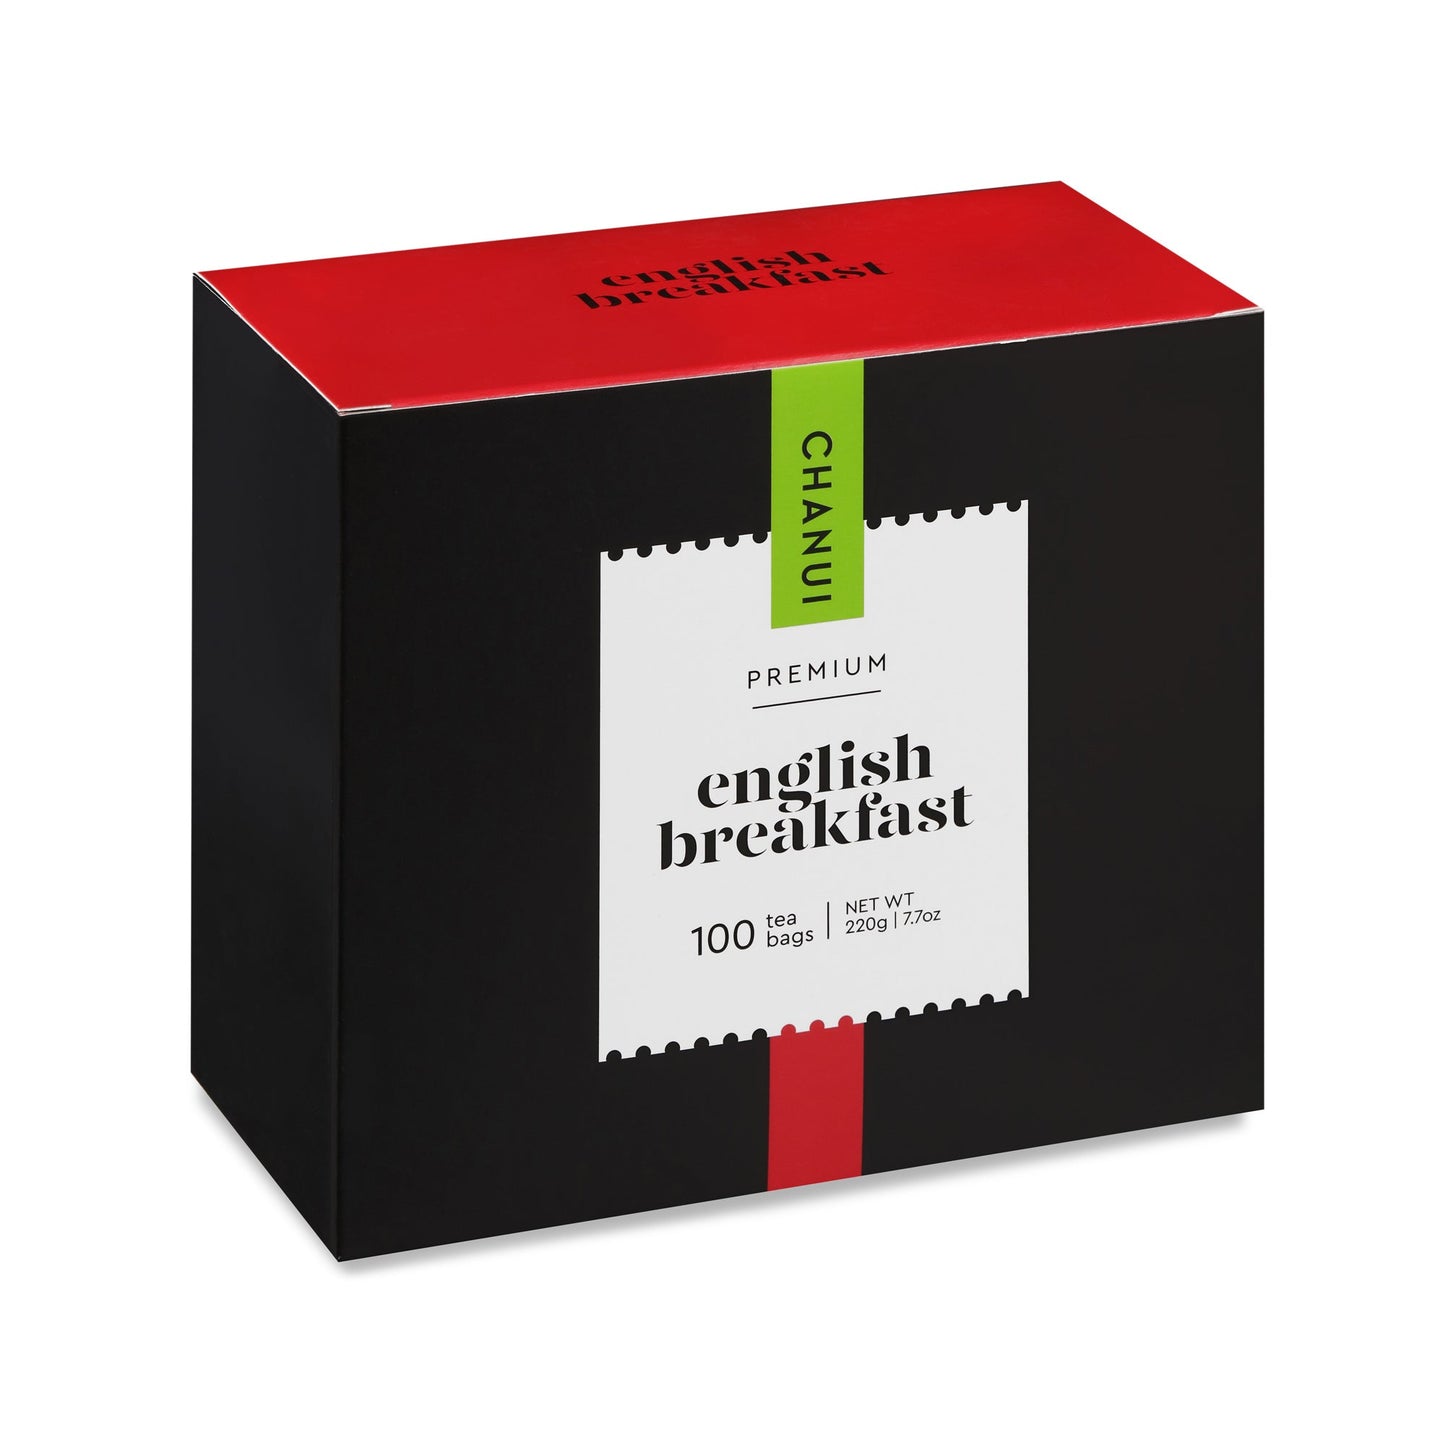 Red and Black box of Chanui English Breakfast 100 Teabags